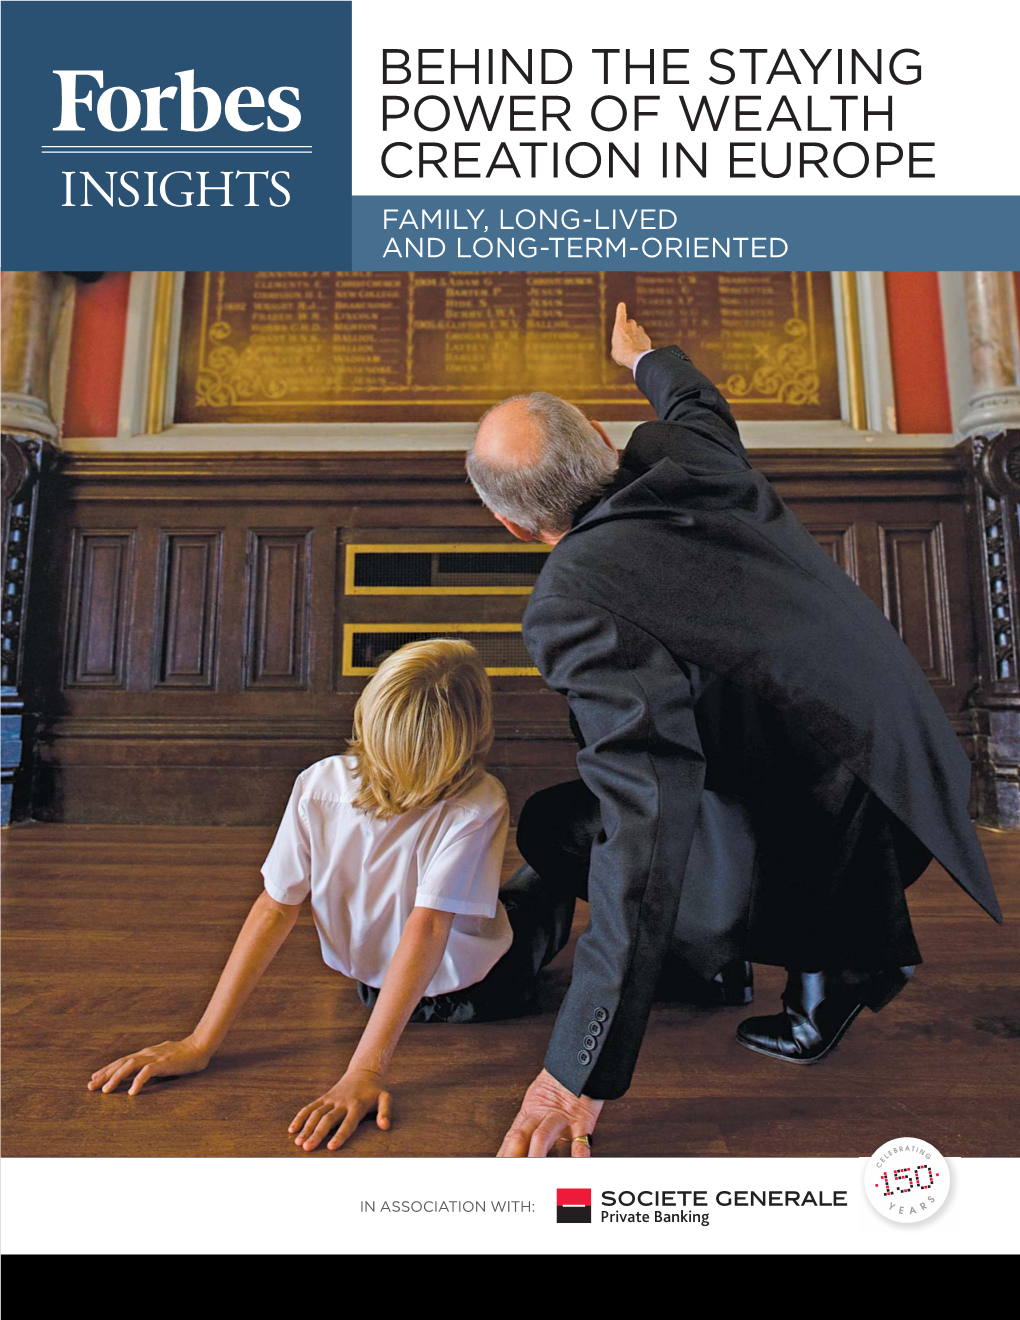 Behind the Staying Power of Wealth Creation in Europe Family, Long-Lived and Long-Term- Oriented